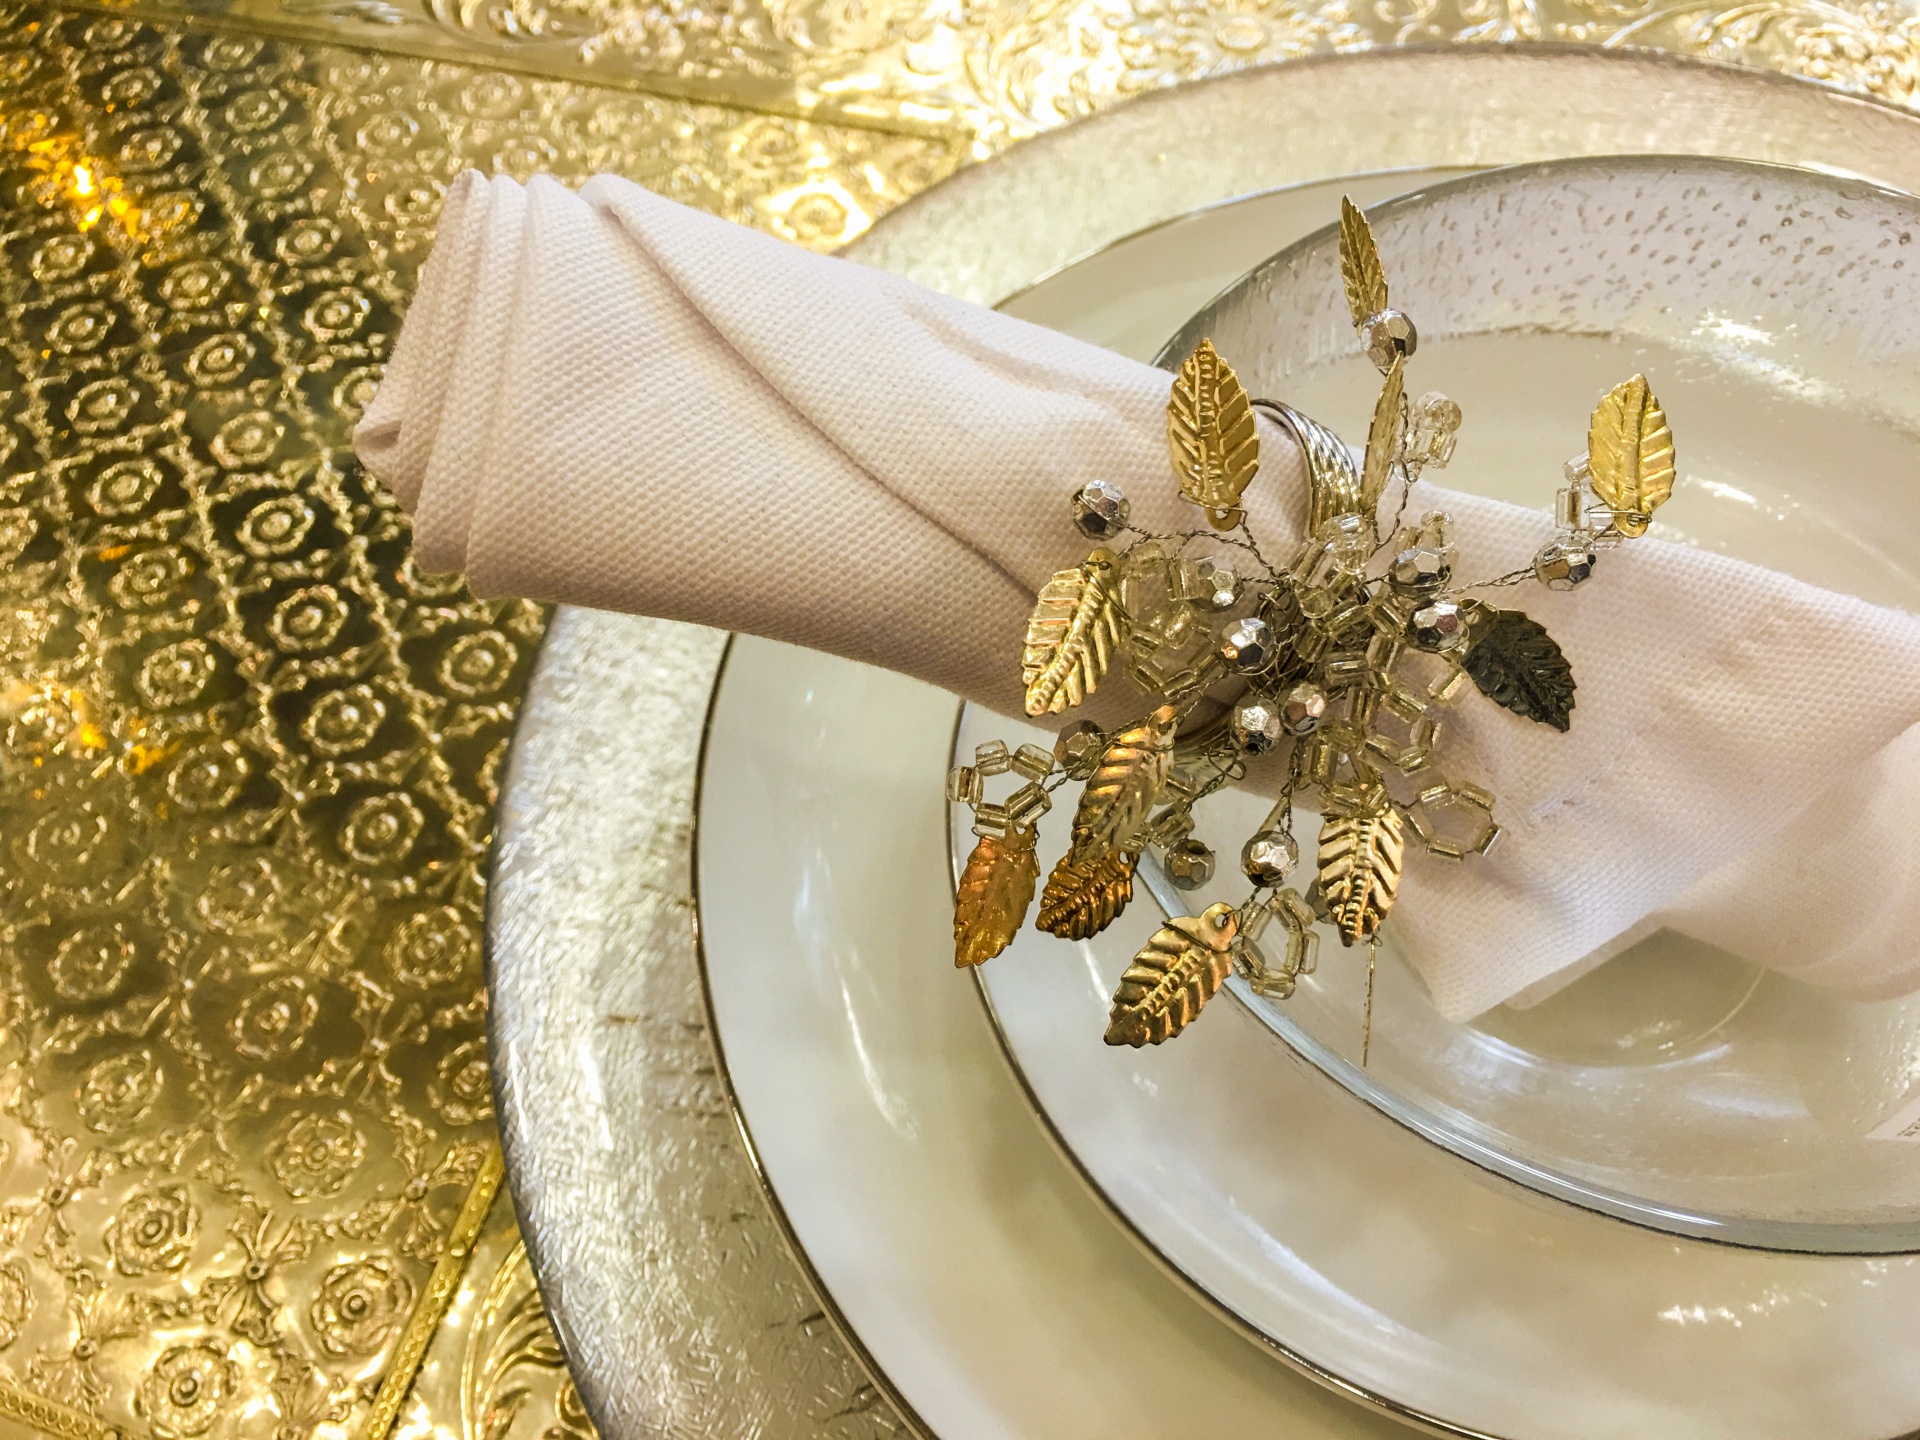 plate-on-luxury-gold-table-free-stock-photo-public-domain-pictures